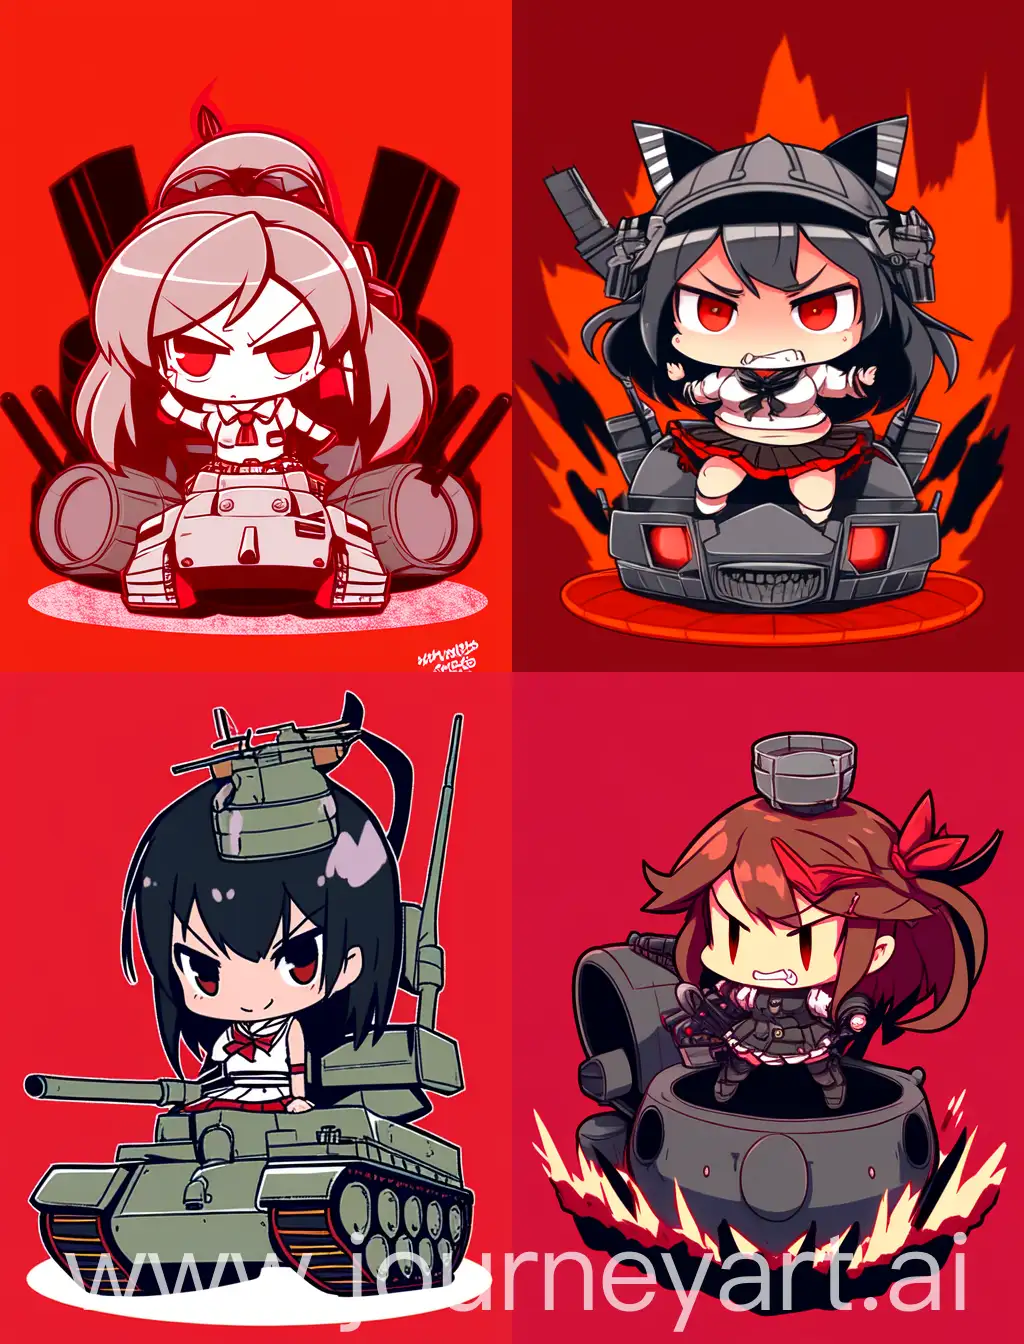 angry chibi anime girl holding a knife, sitting on top of a tank, cartoon anime style, with strong lines, with red solid background